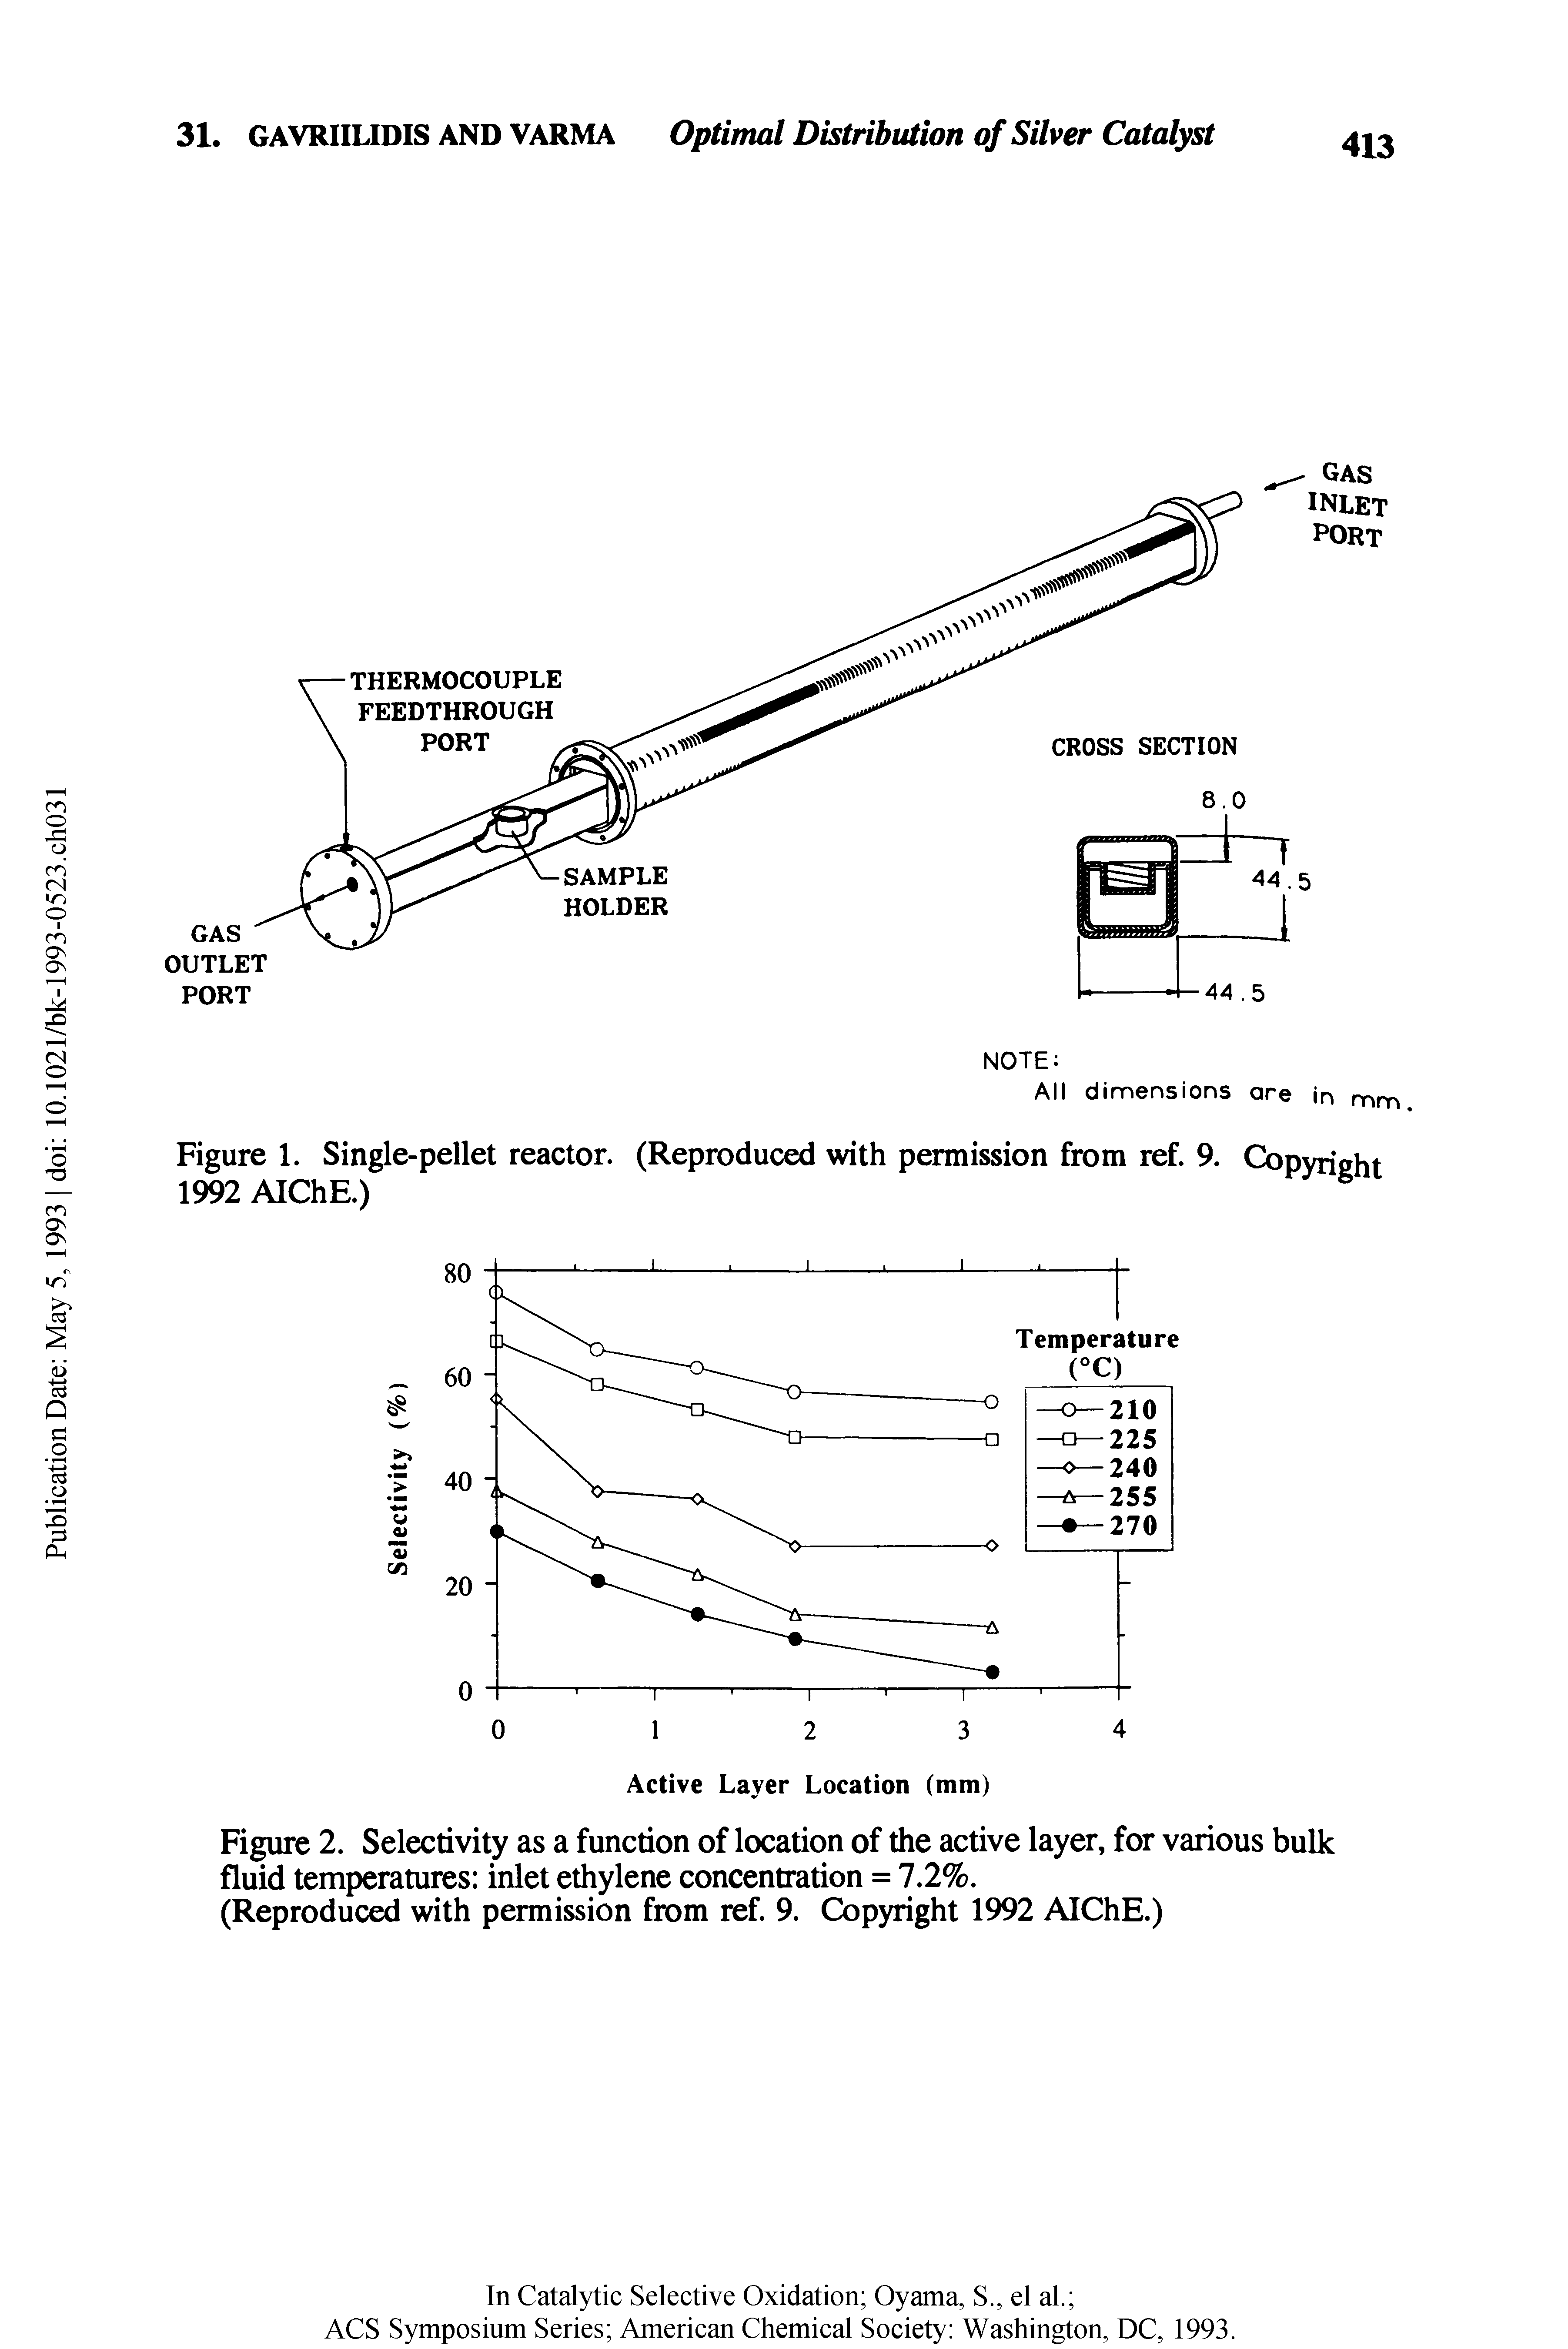 Figure 2. Selectivity as a function of location of the active layer, for various bulk fluid temperatures inlet ethylene concentration = 7.2%.